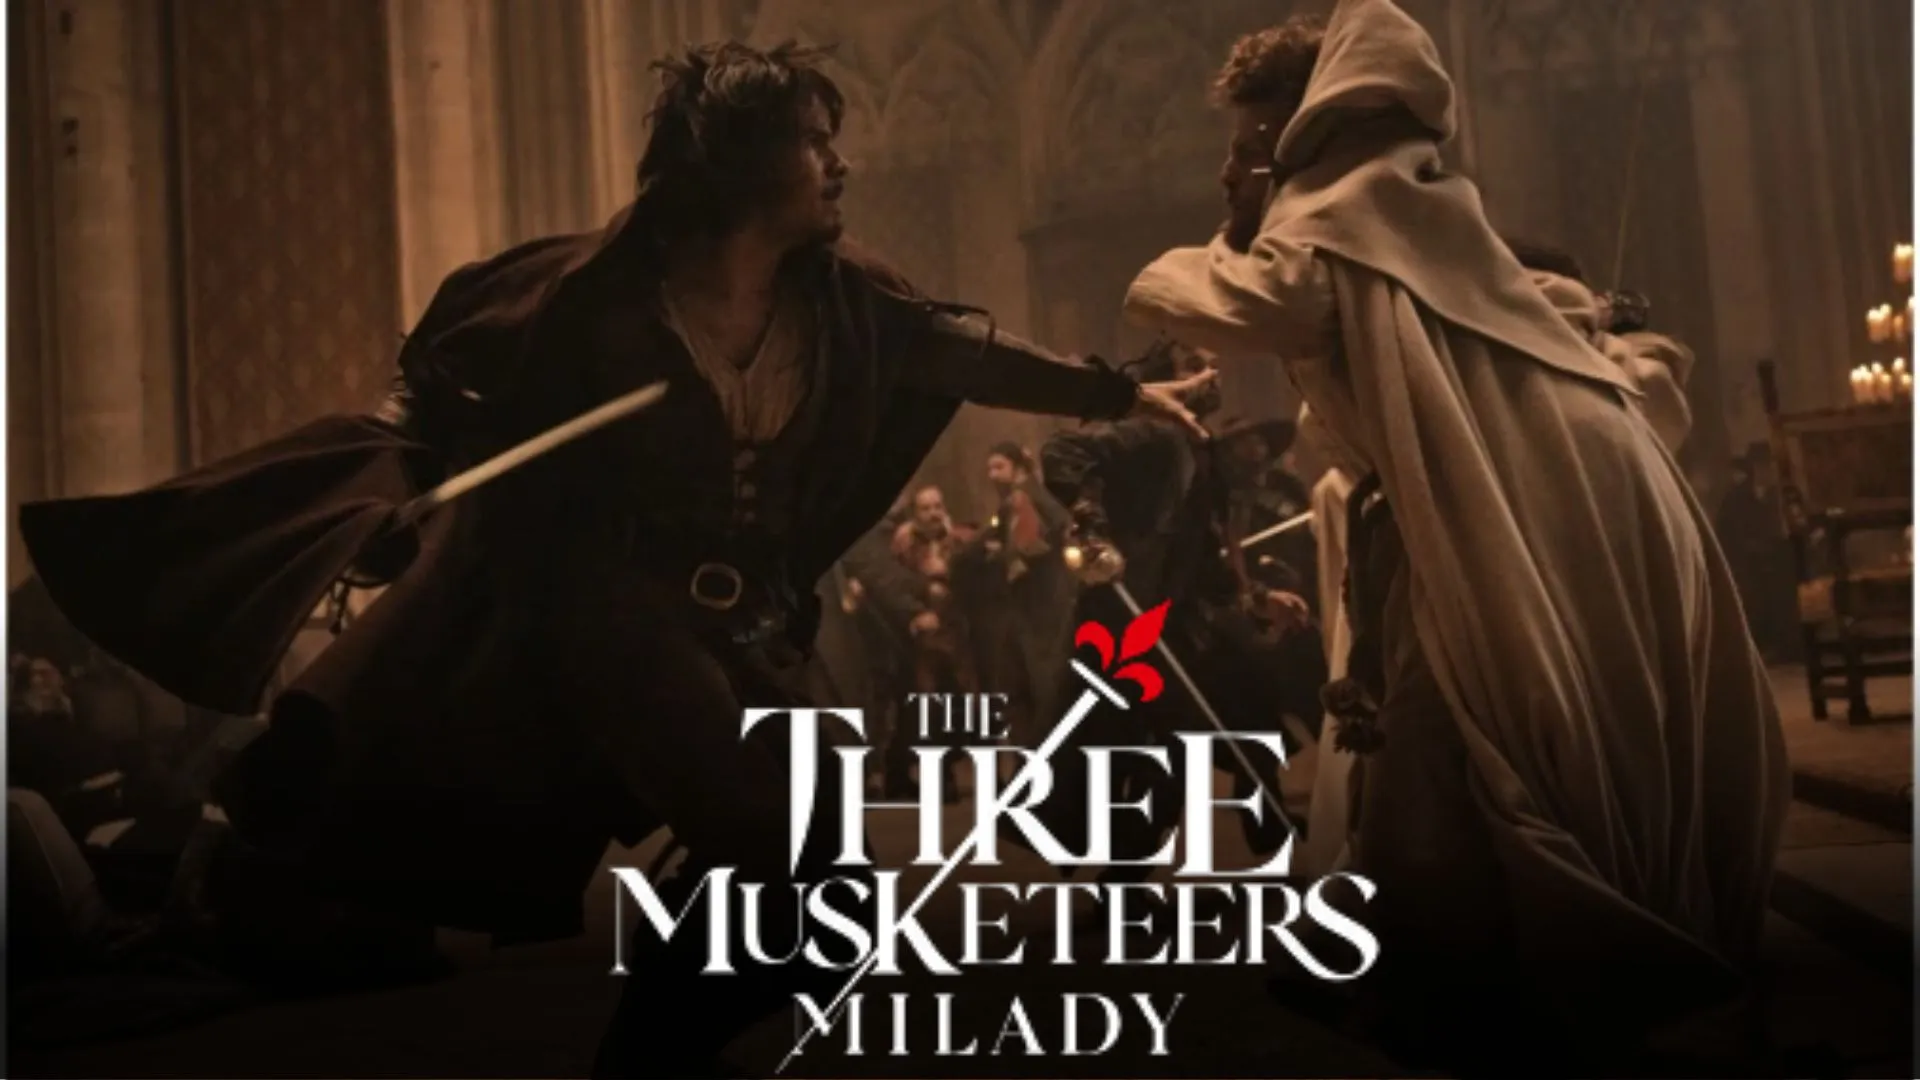 The Three Musketeers: Milady Parents guide